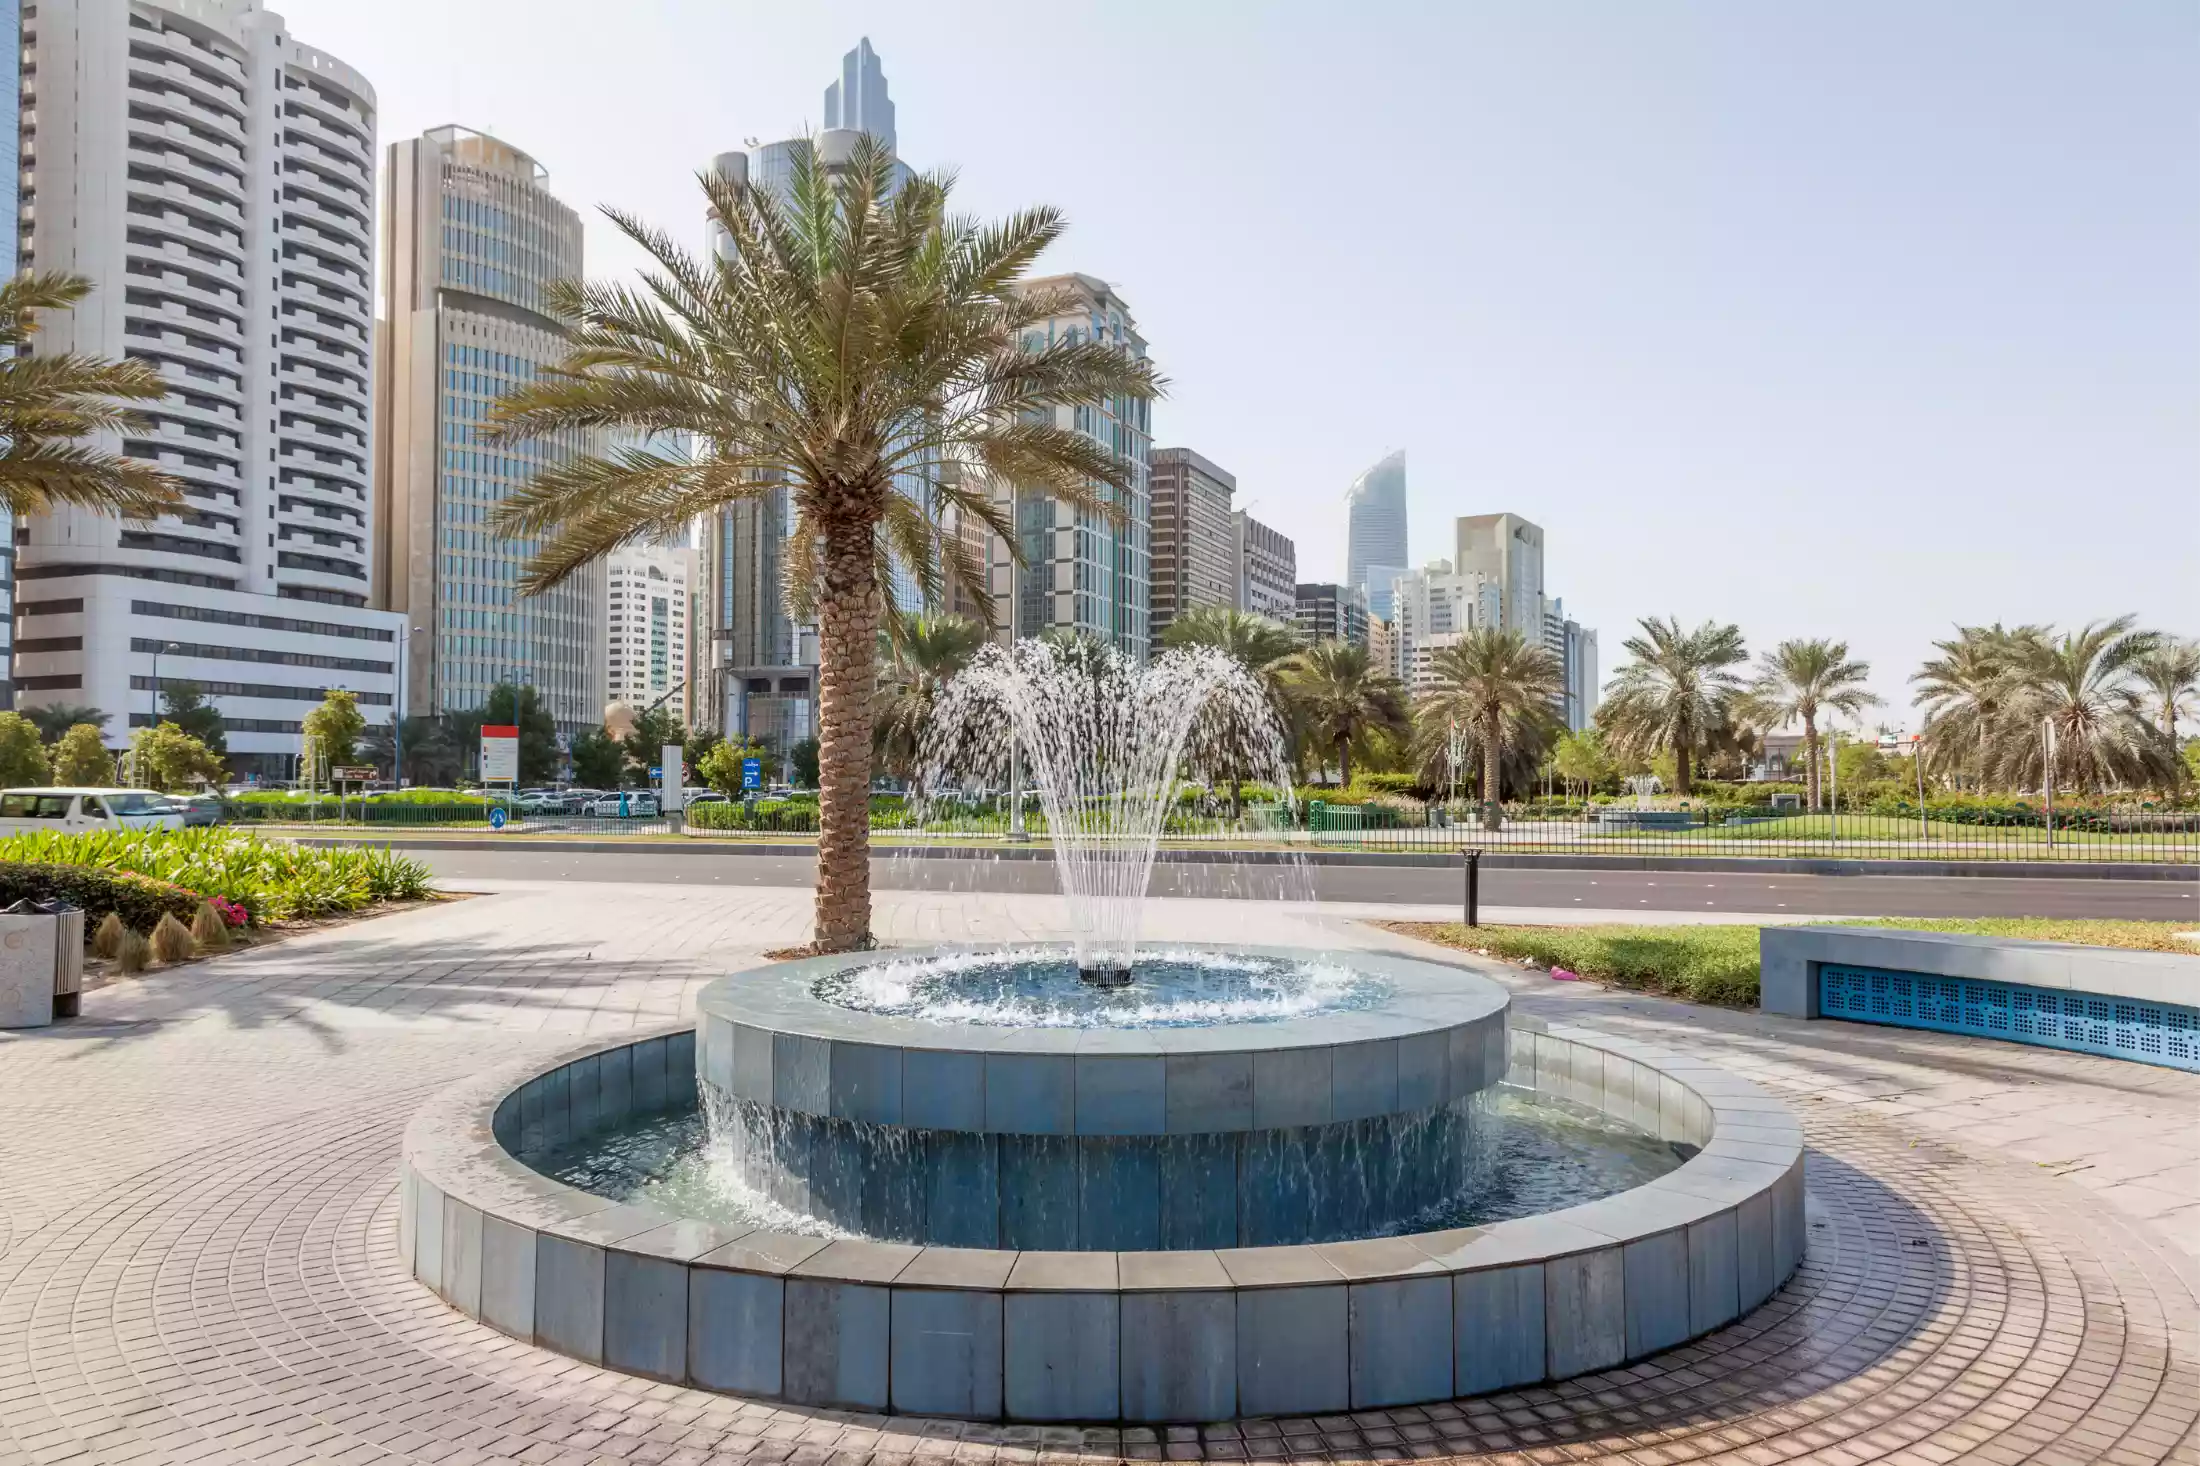 A fountain in one of the parks in Abu Dhabi.